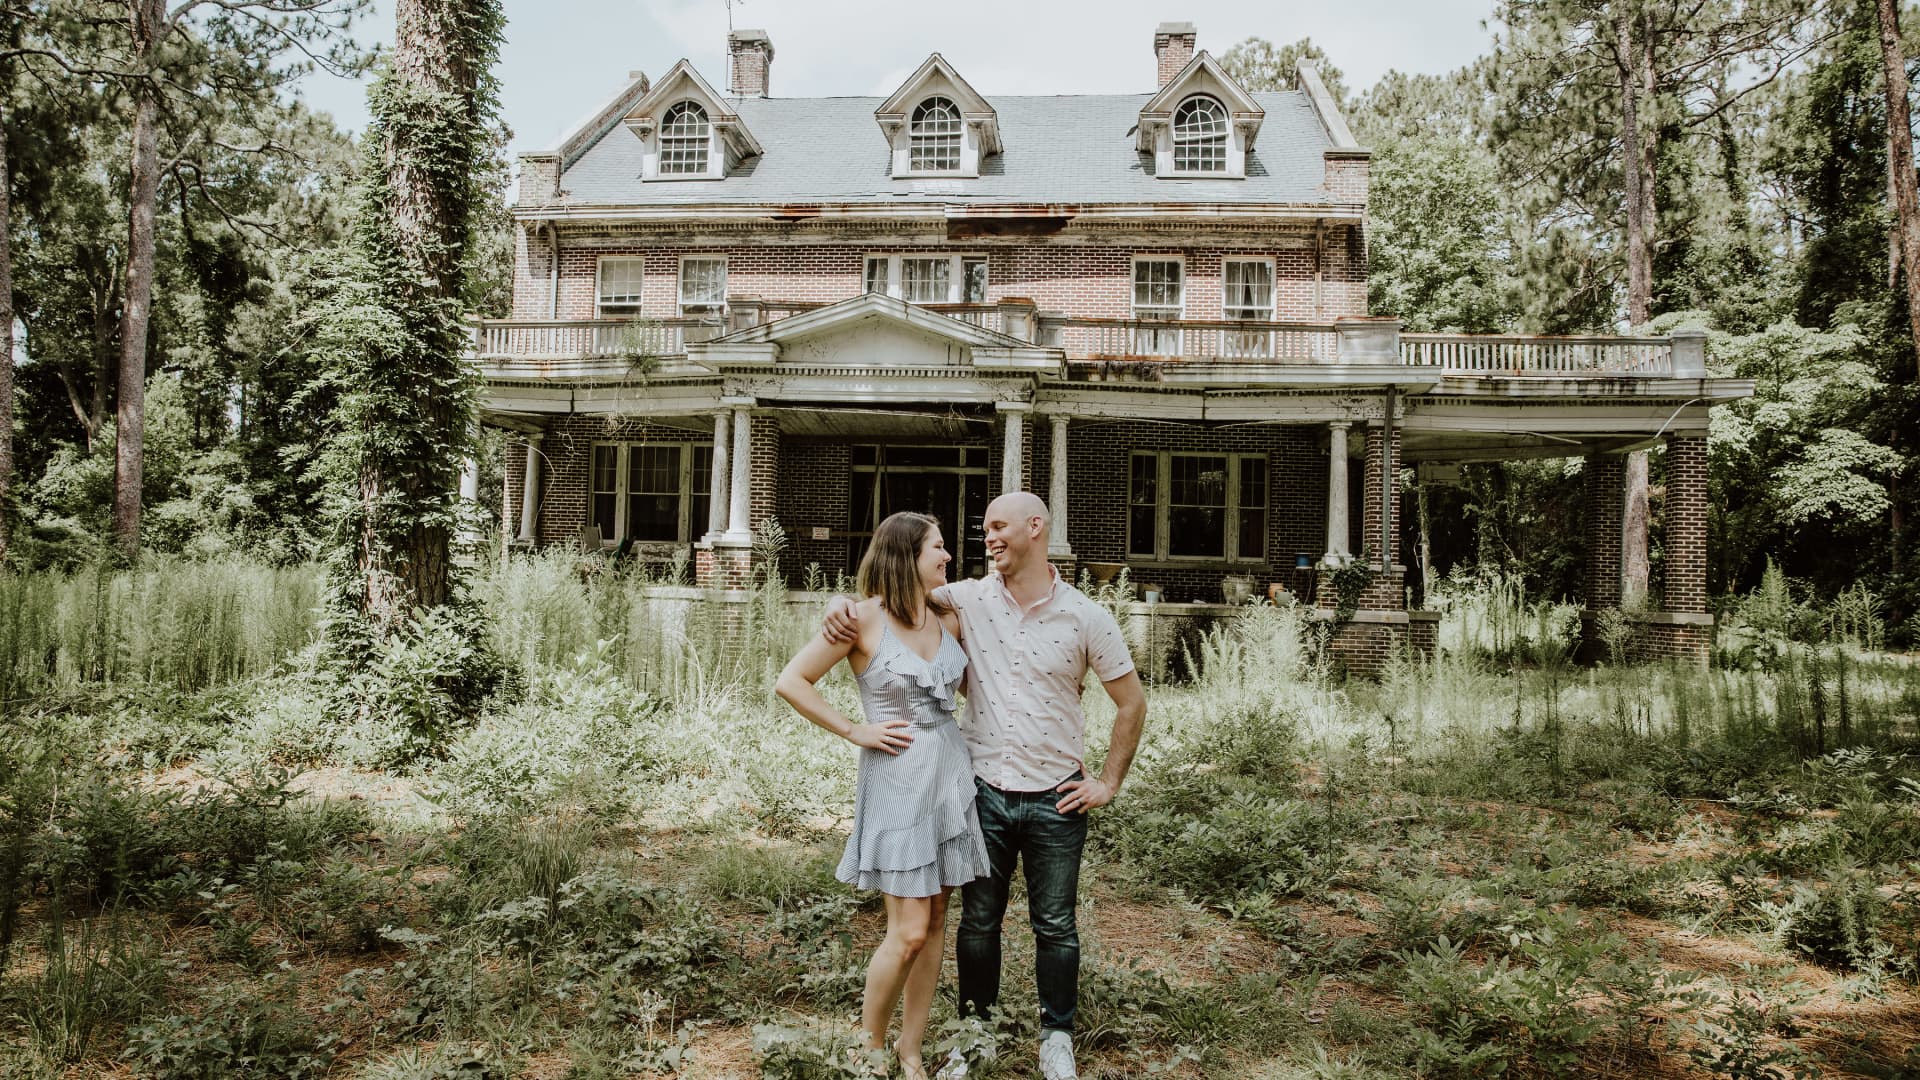 This couple bought and renovated a 109-year-old mansion for less than $500,000. Now it's worth $900,000–take a look inside - CNBC